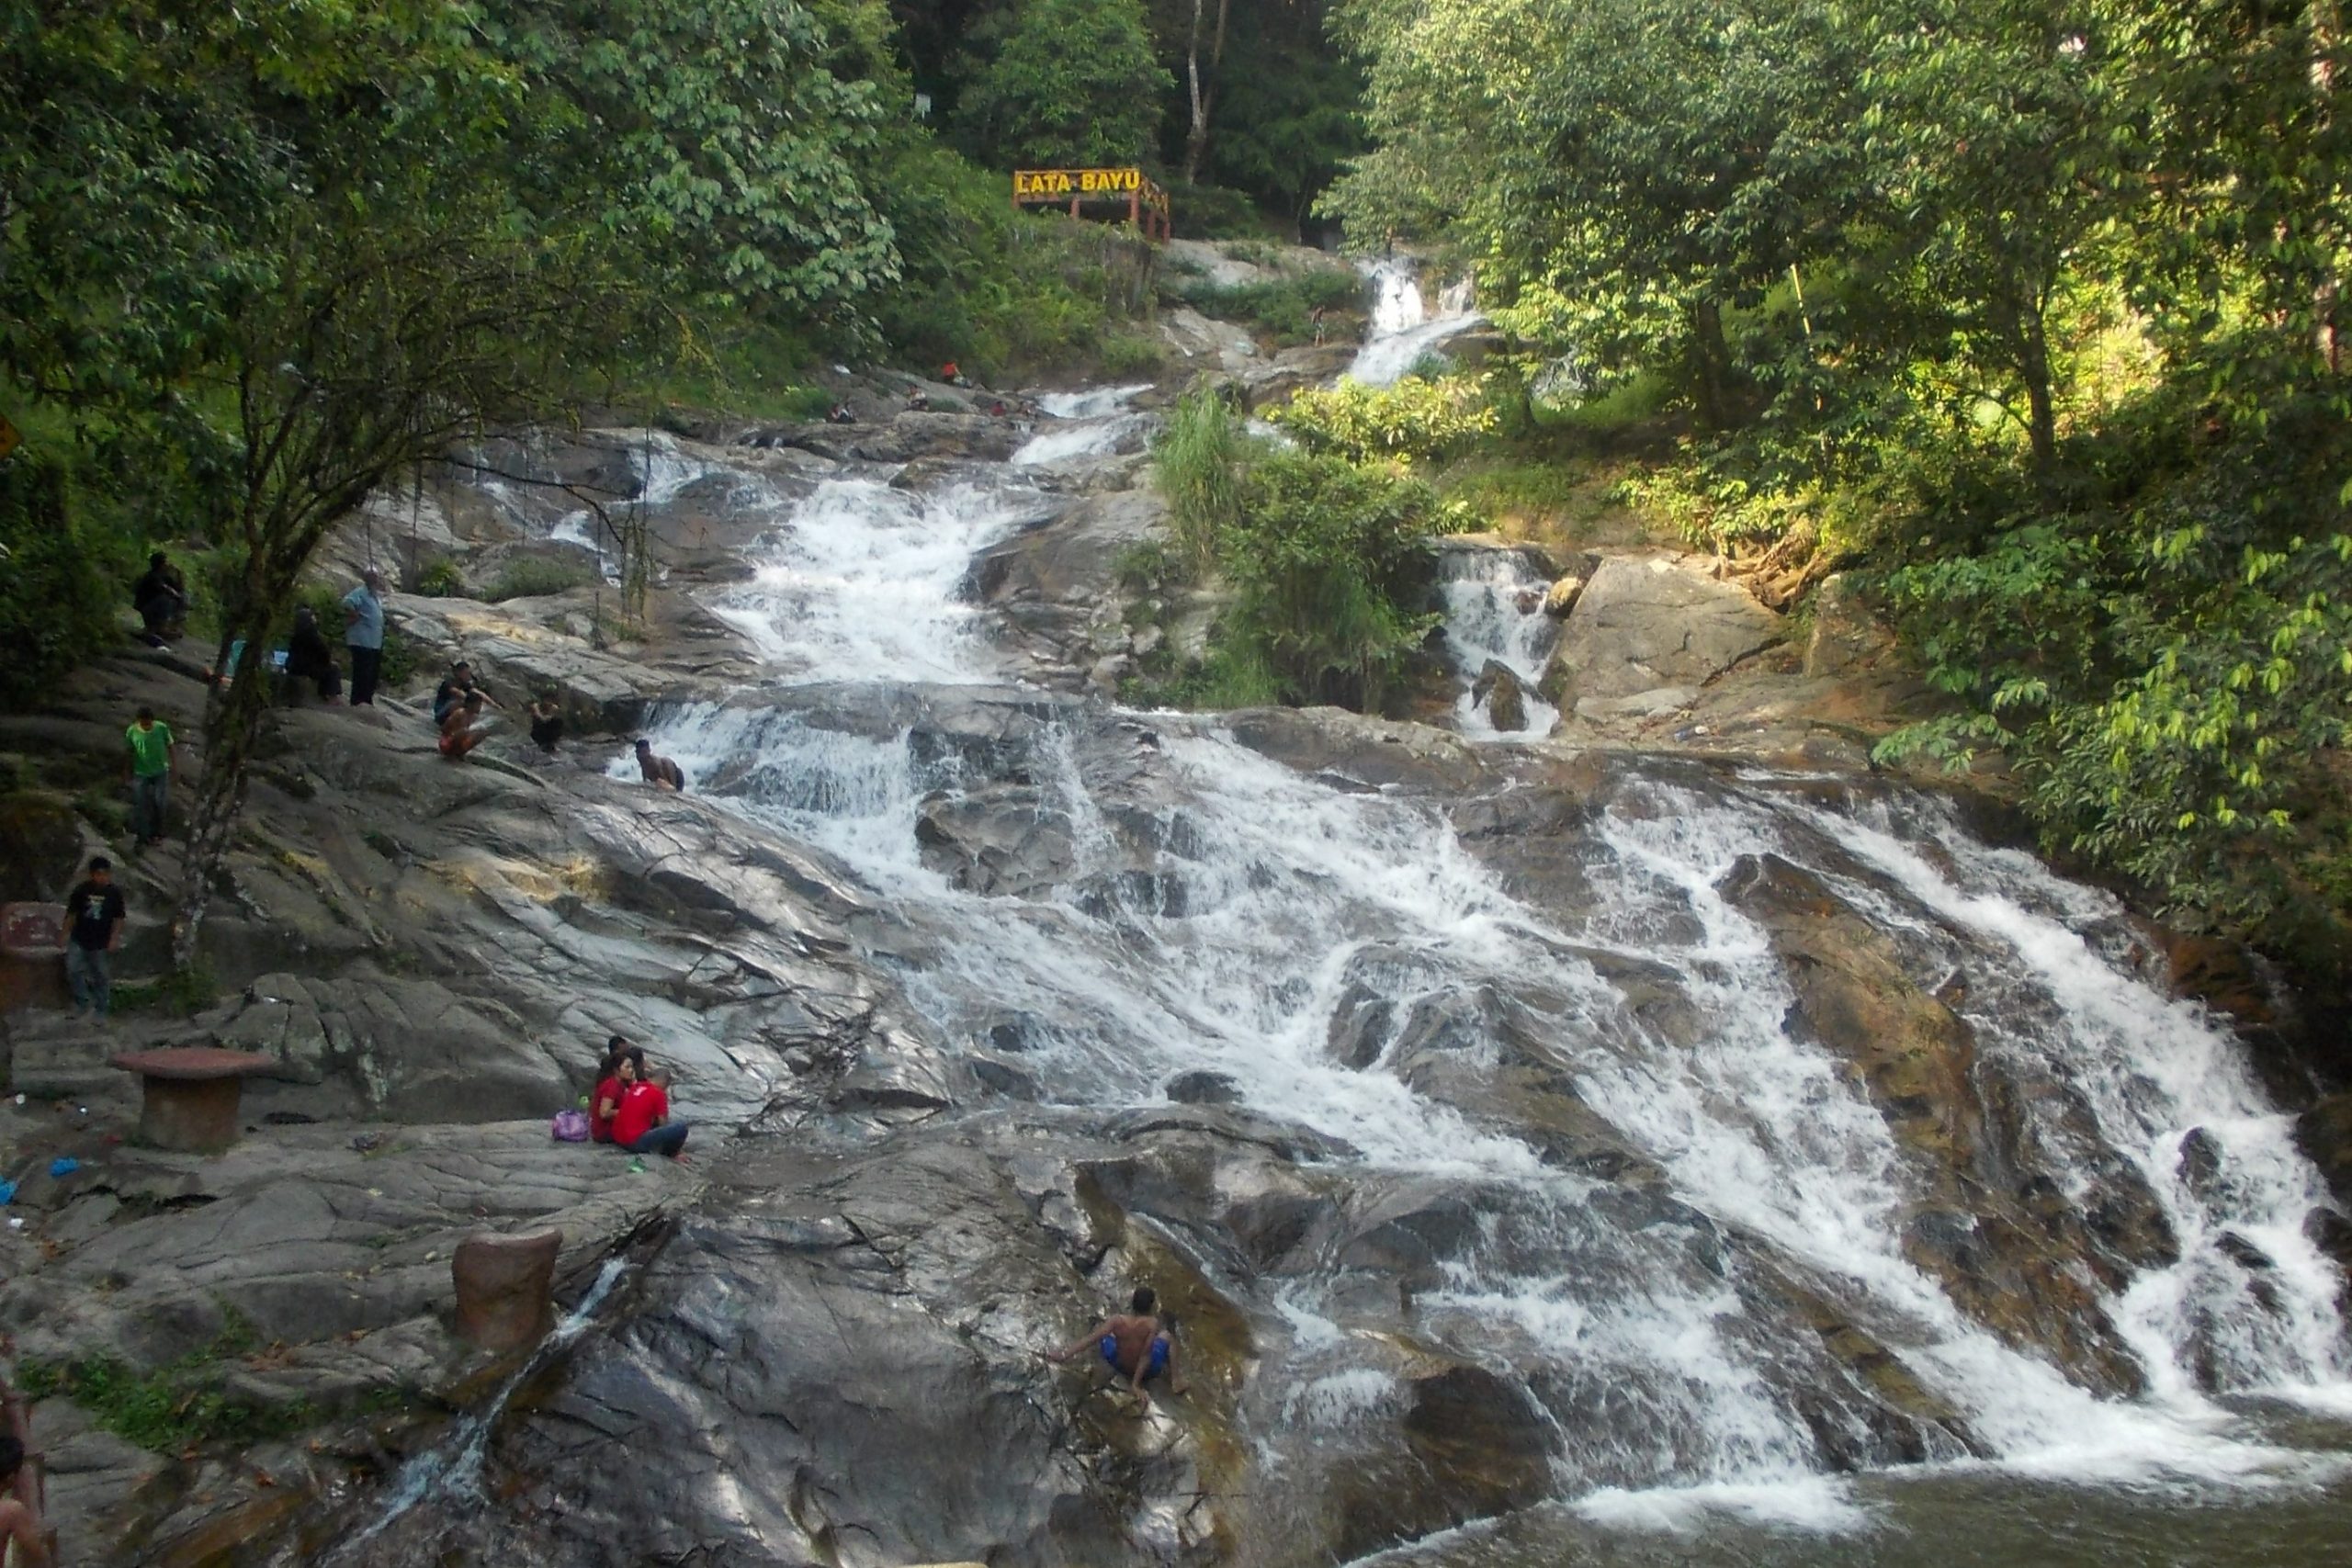 CDF advises public to avoid Lata Bayu waterfall, other hotpots